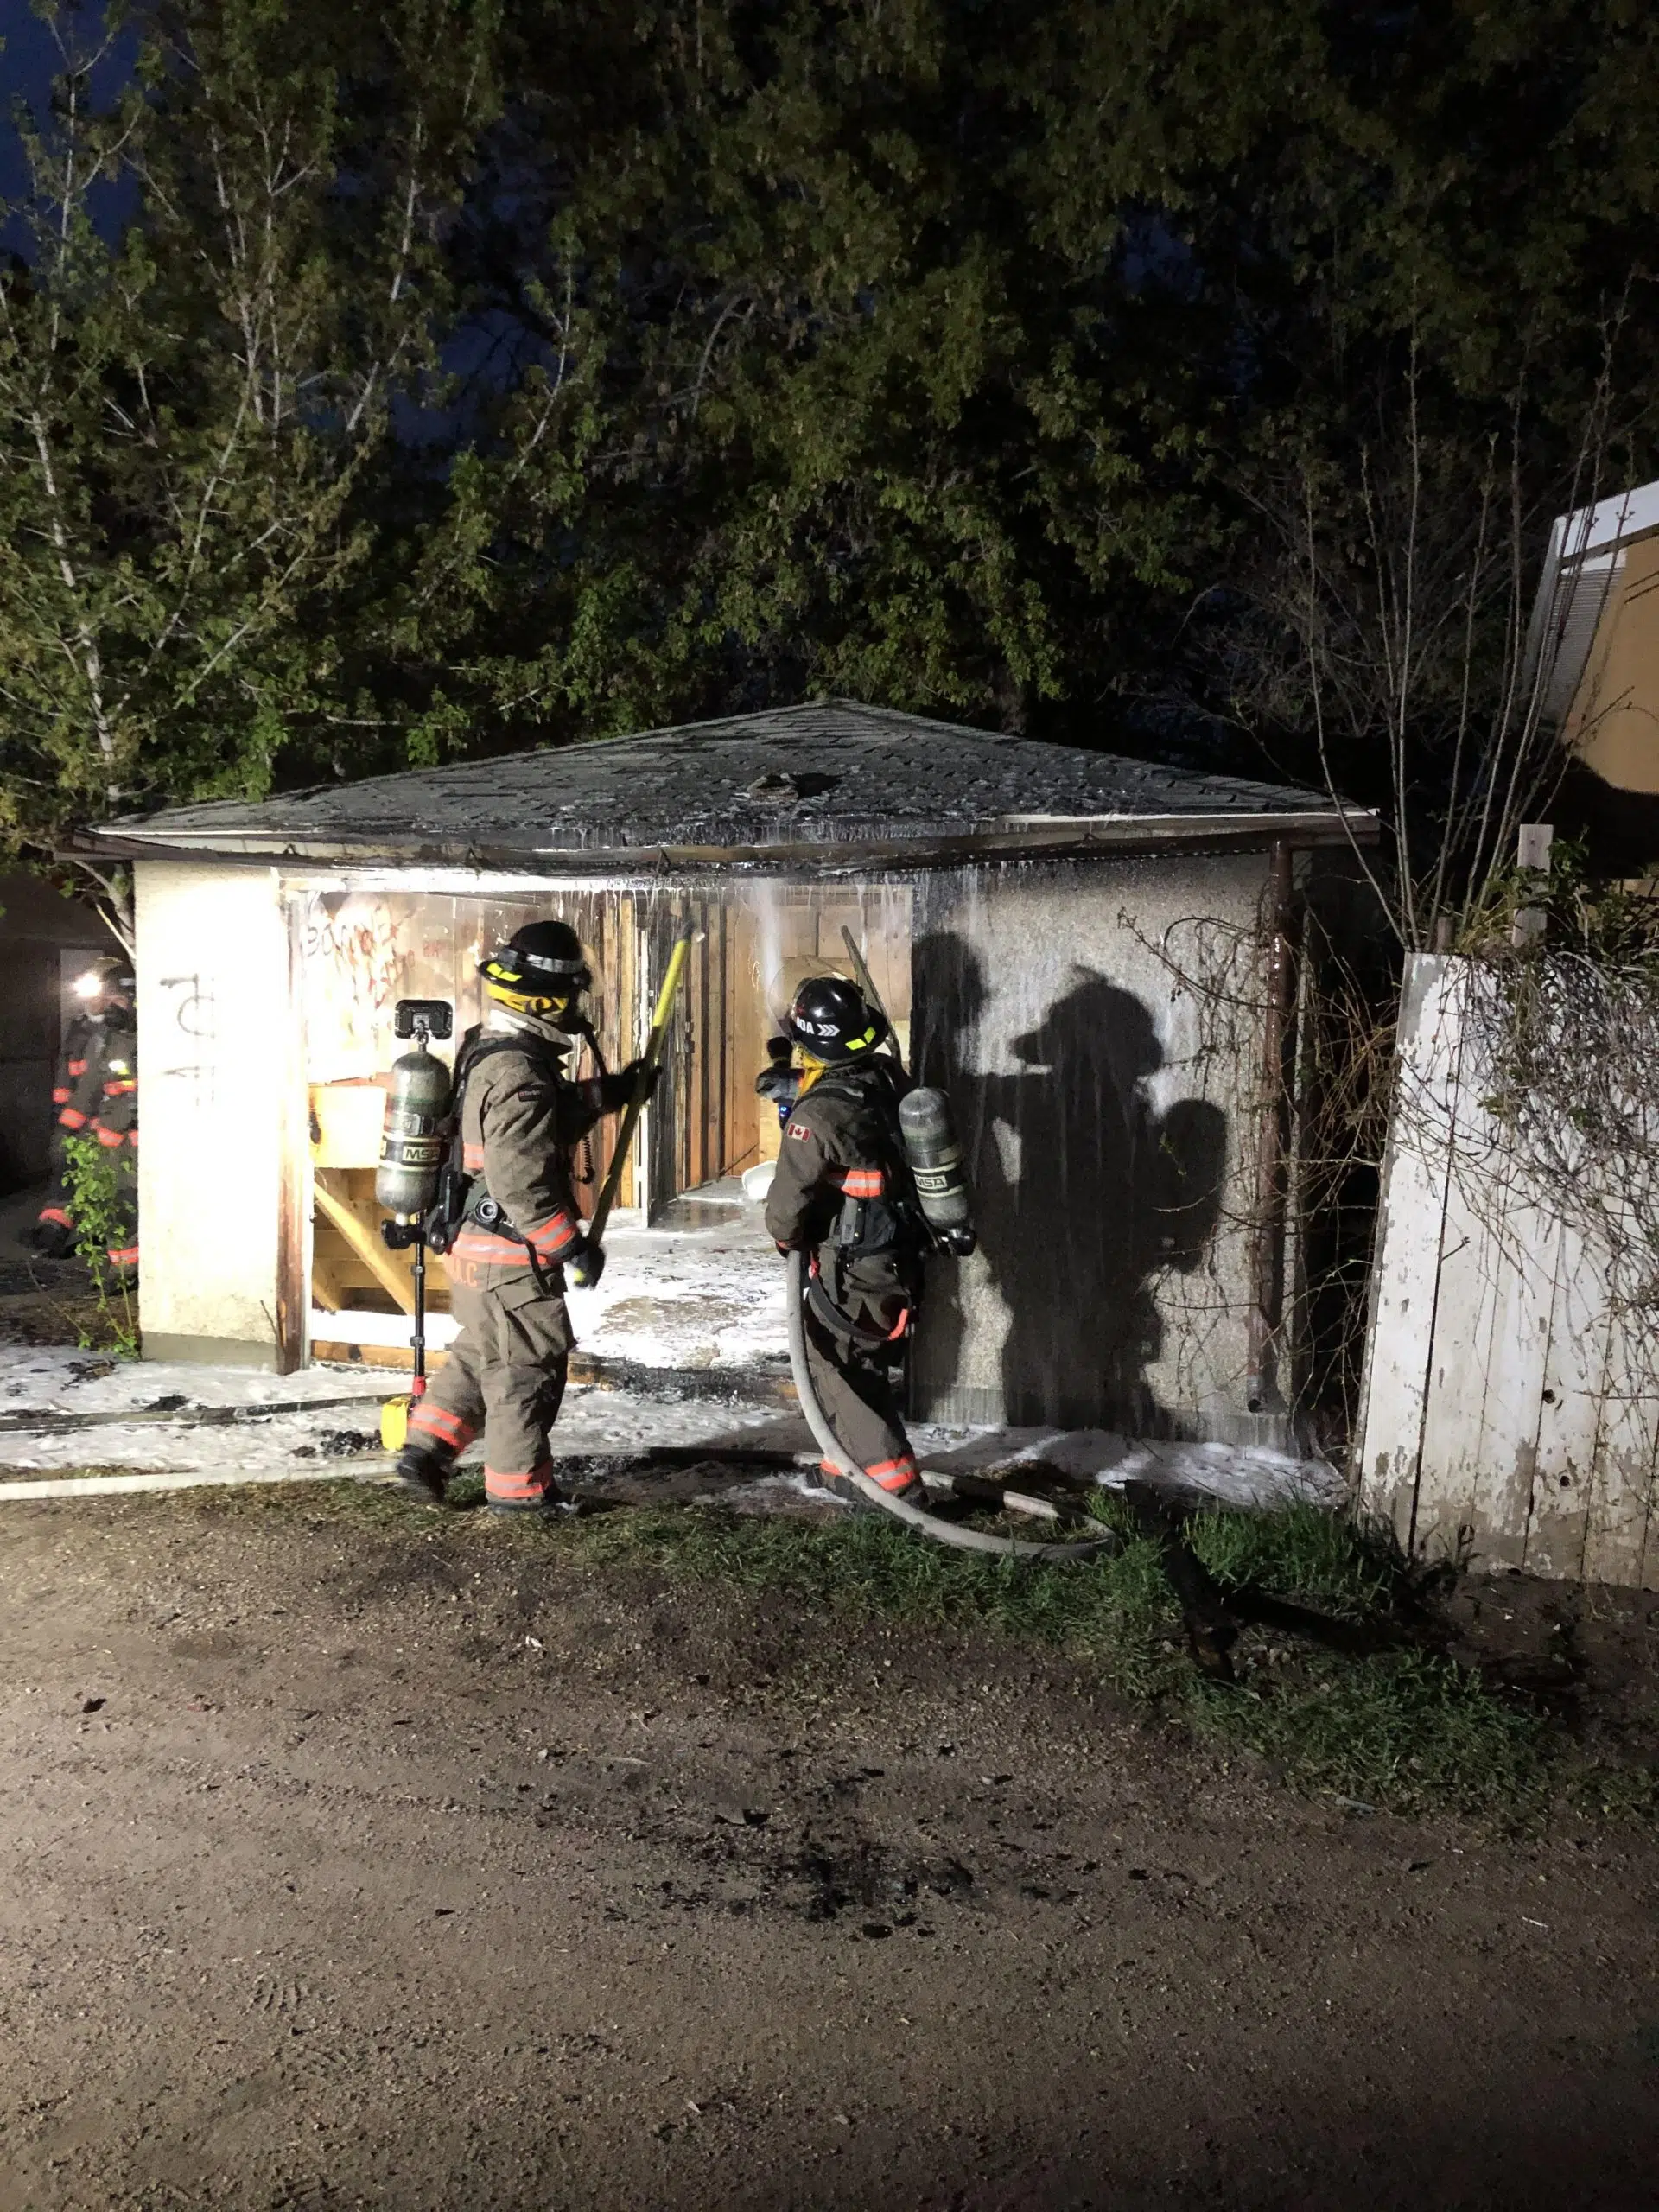 No injuries reported in house, garage fires Thursday night